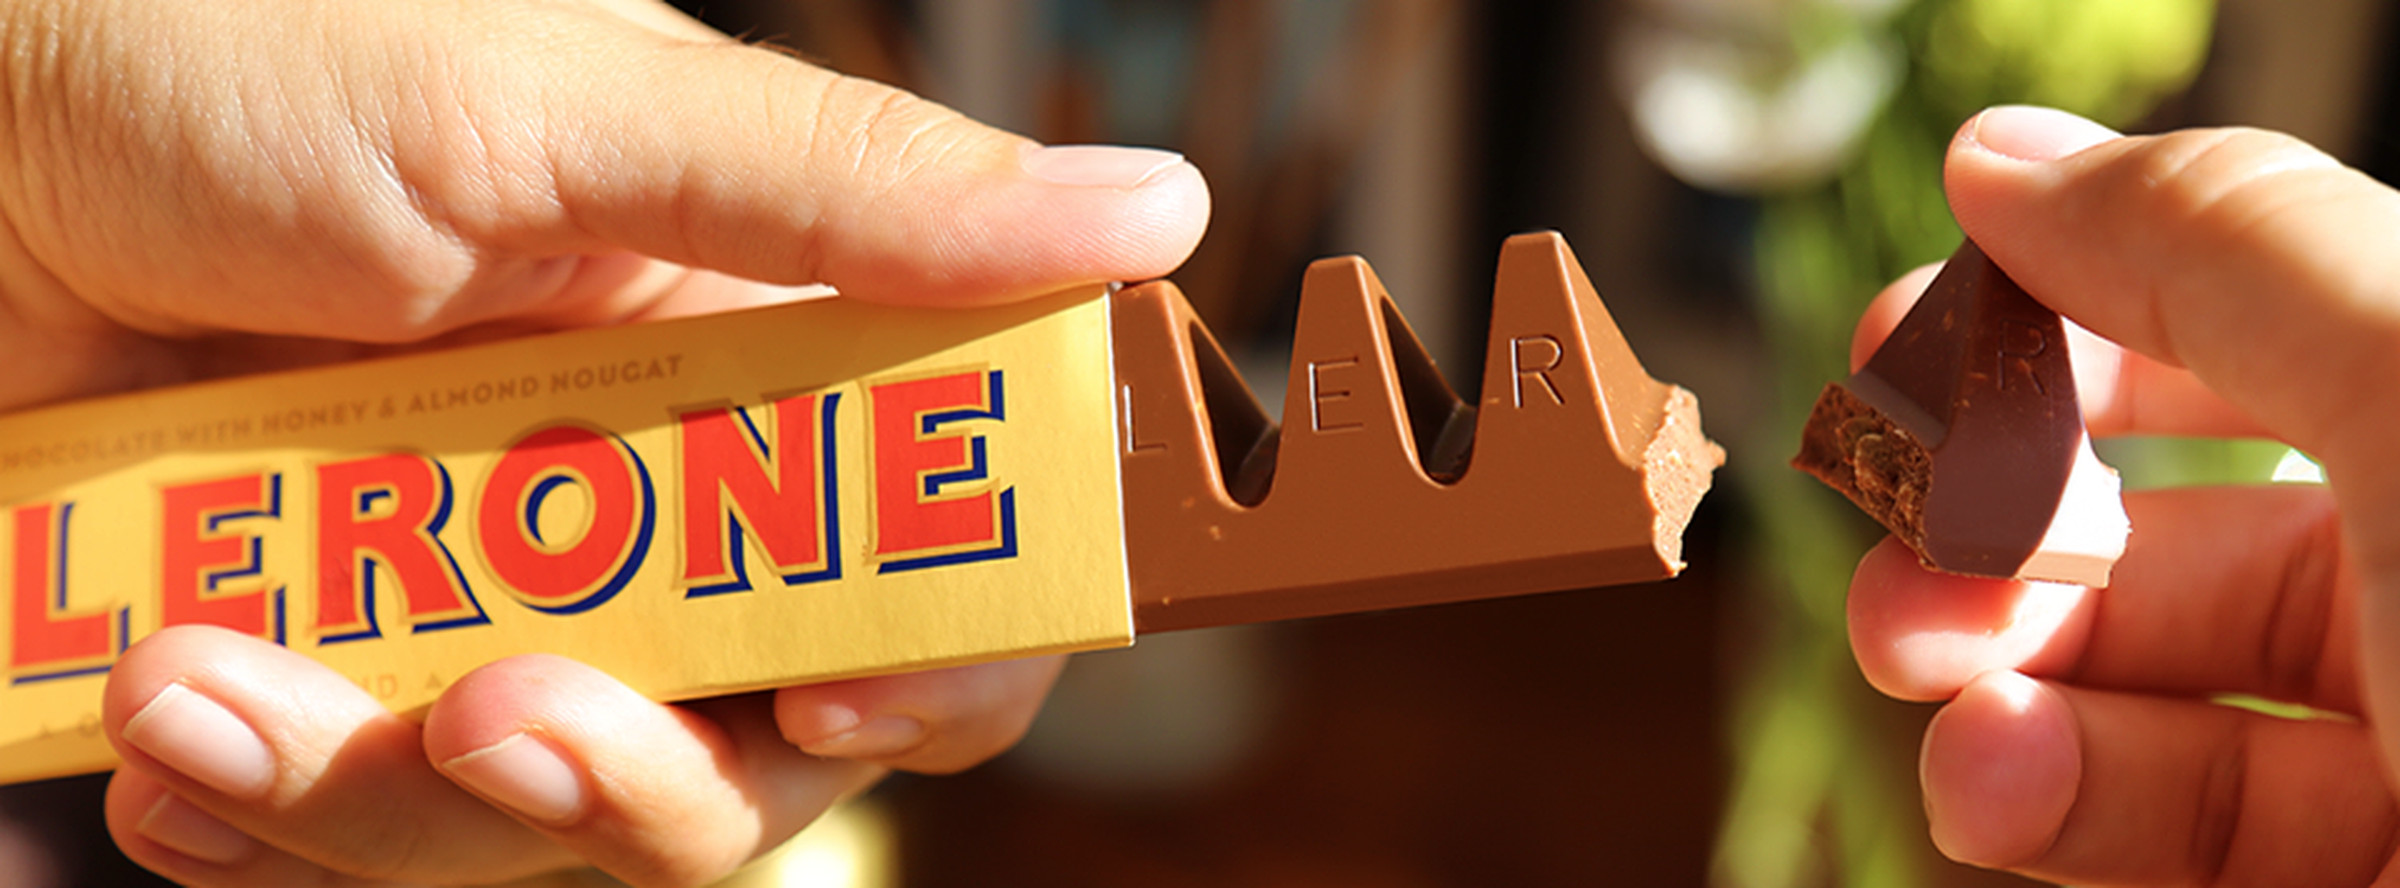 The old Toblerone, in happier times.